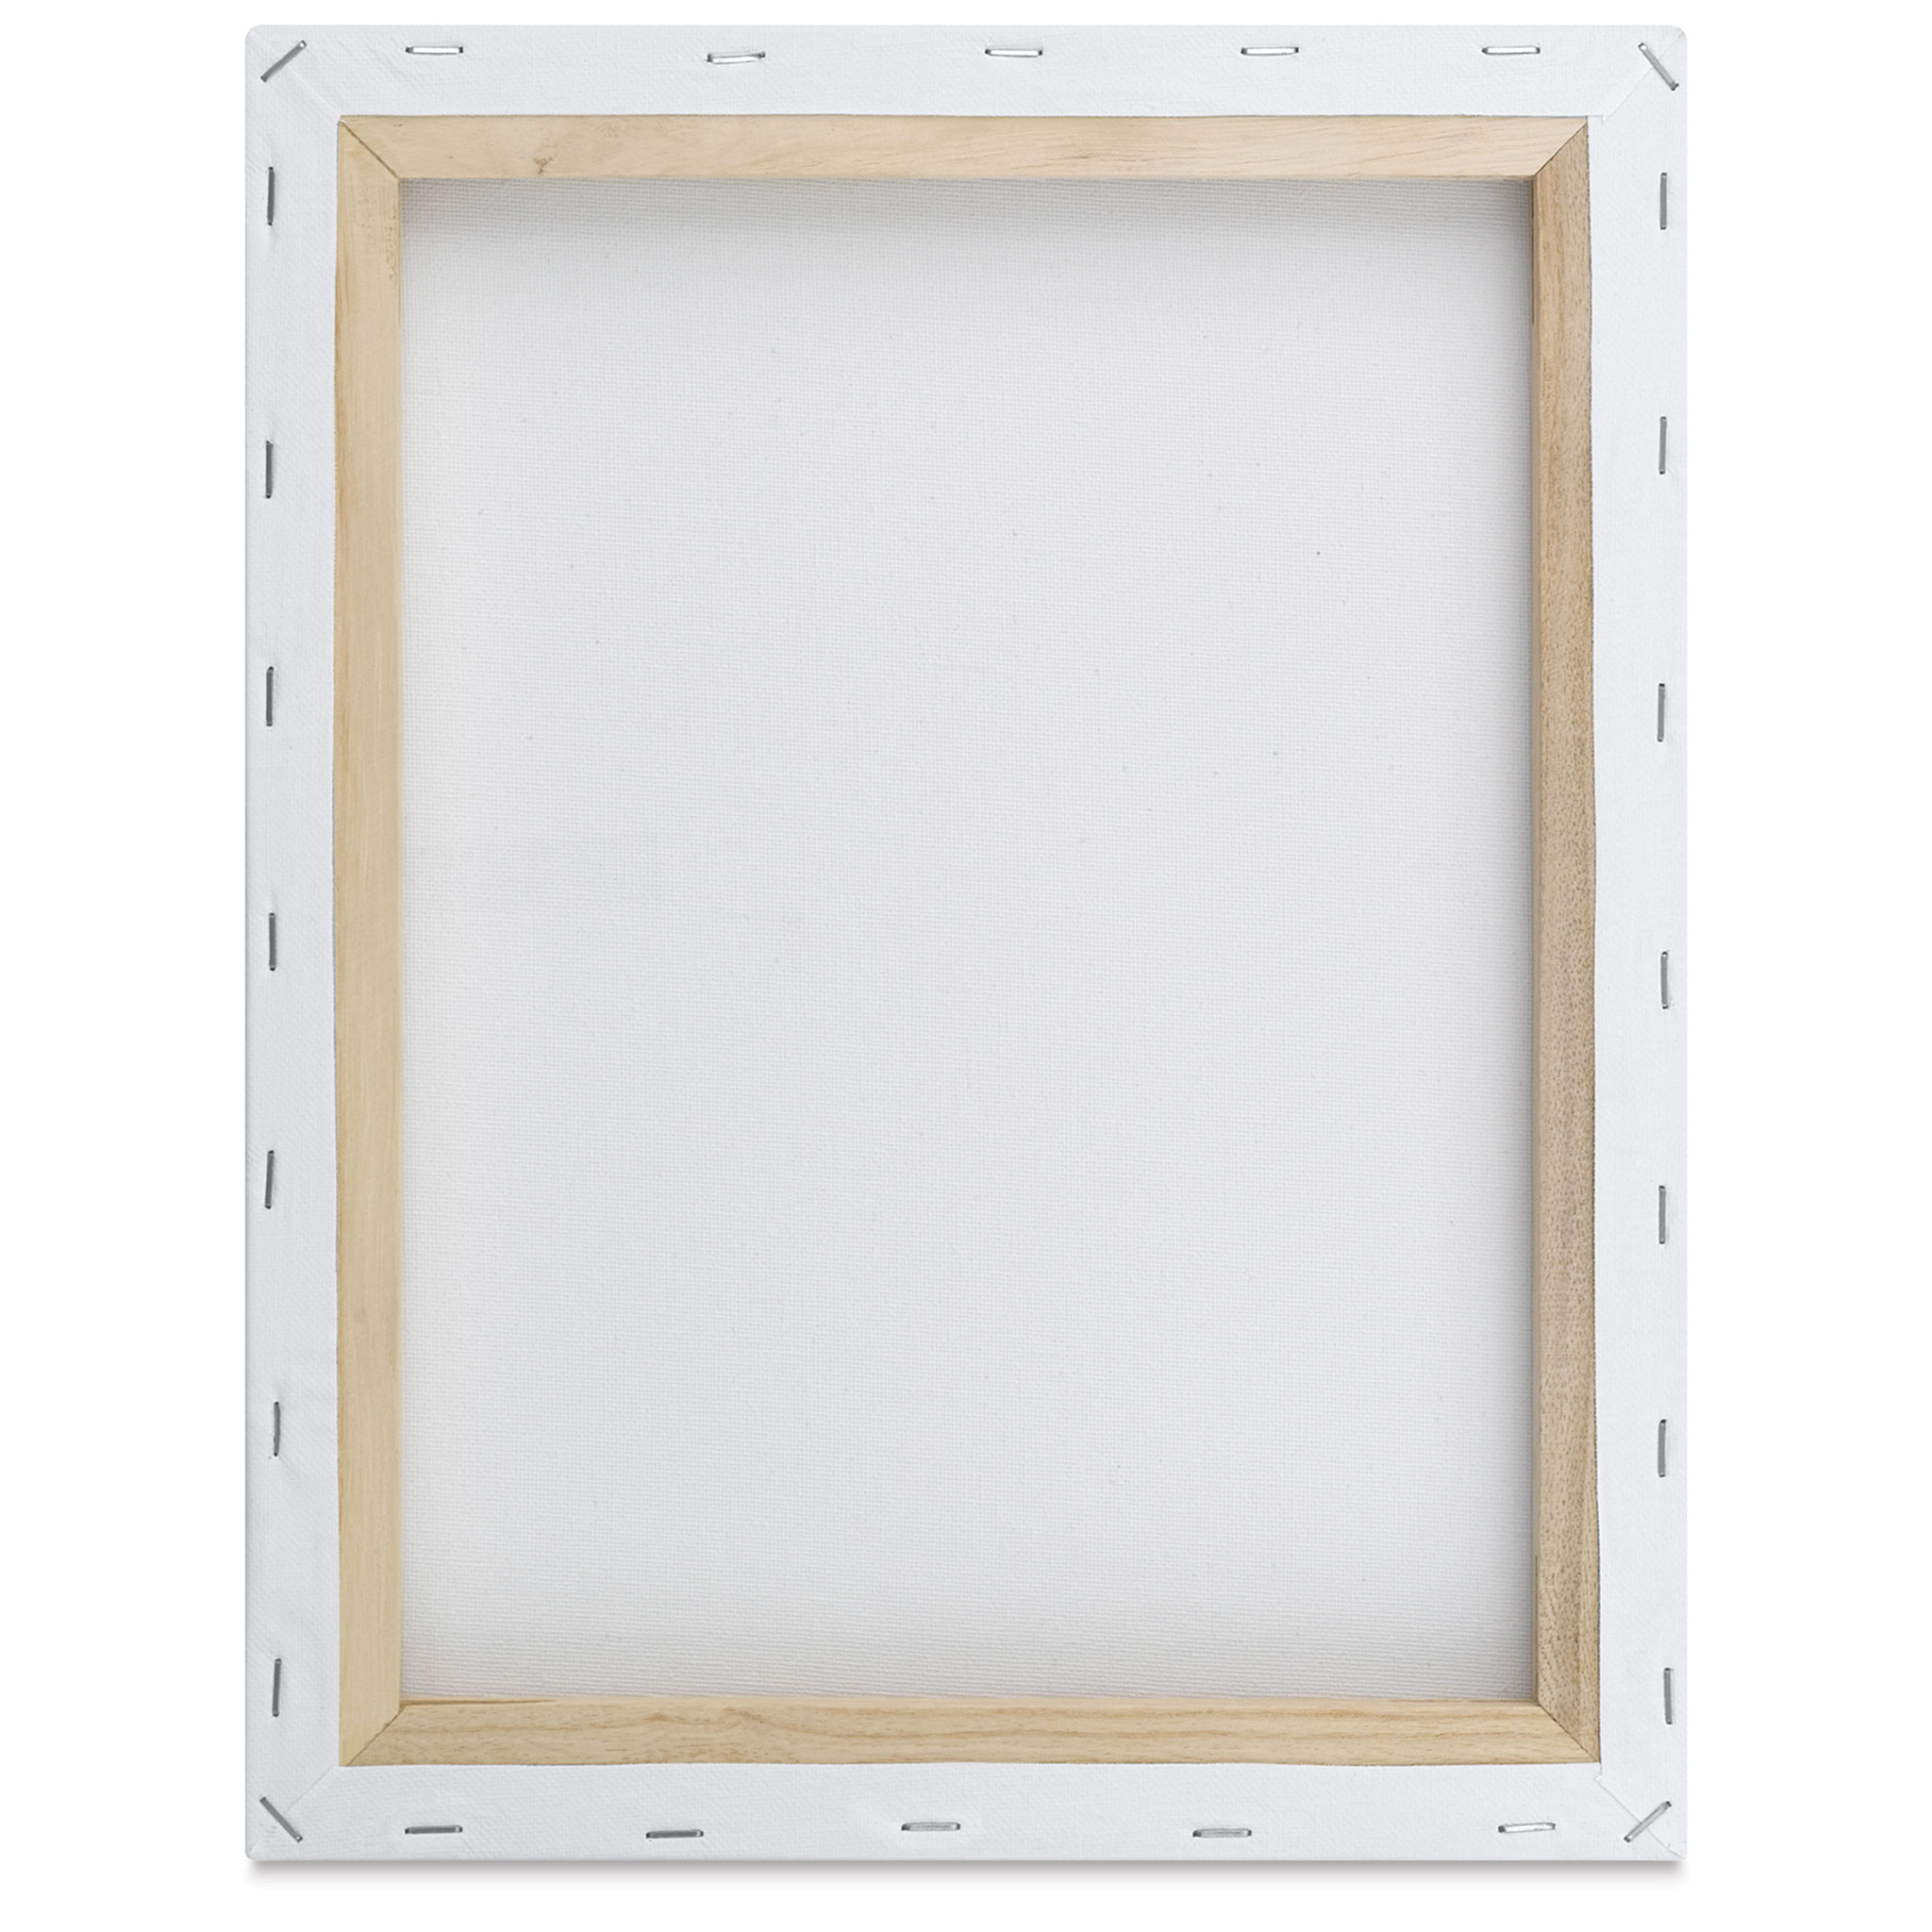 Academy Art Supply Stretched Canvas (11x14) - Blank Canvas for